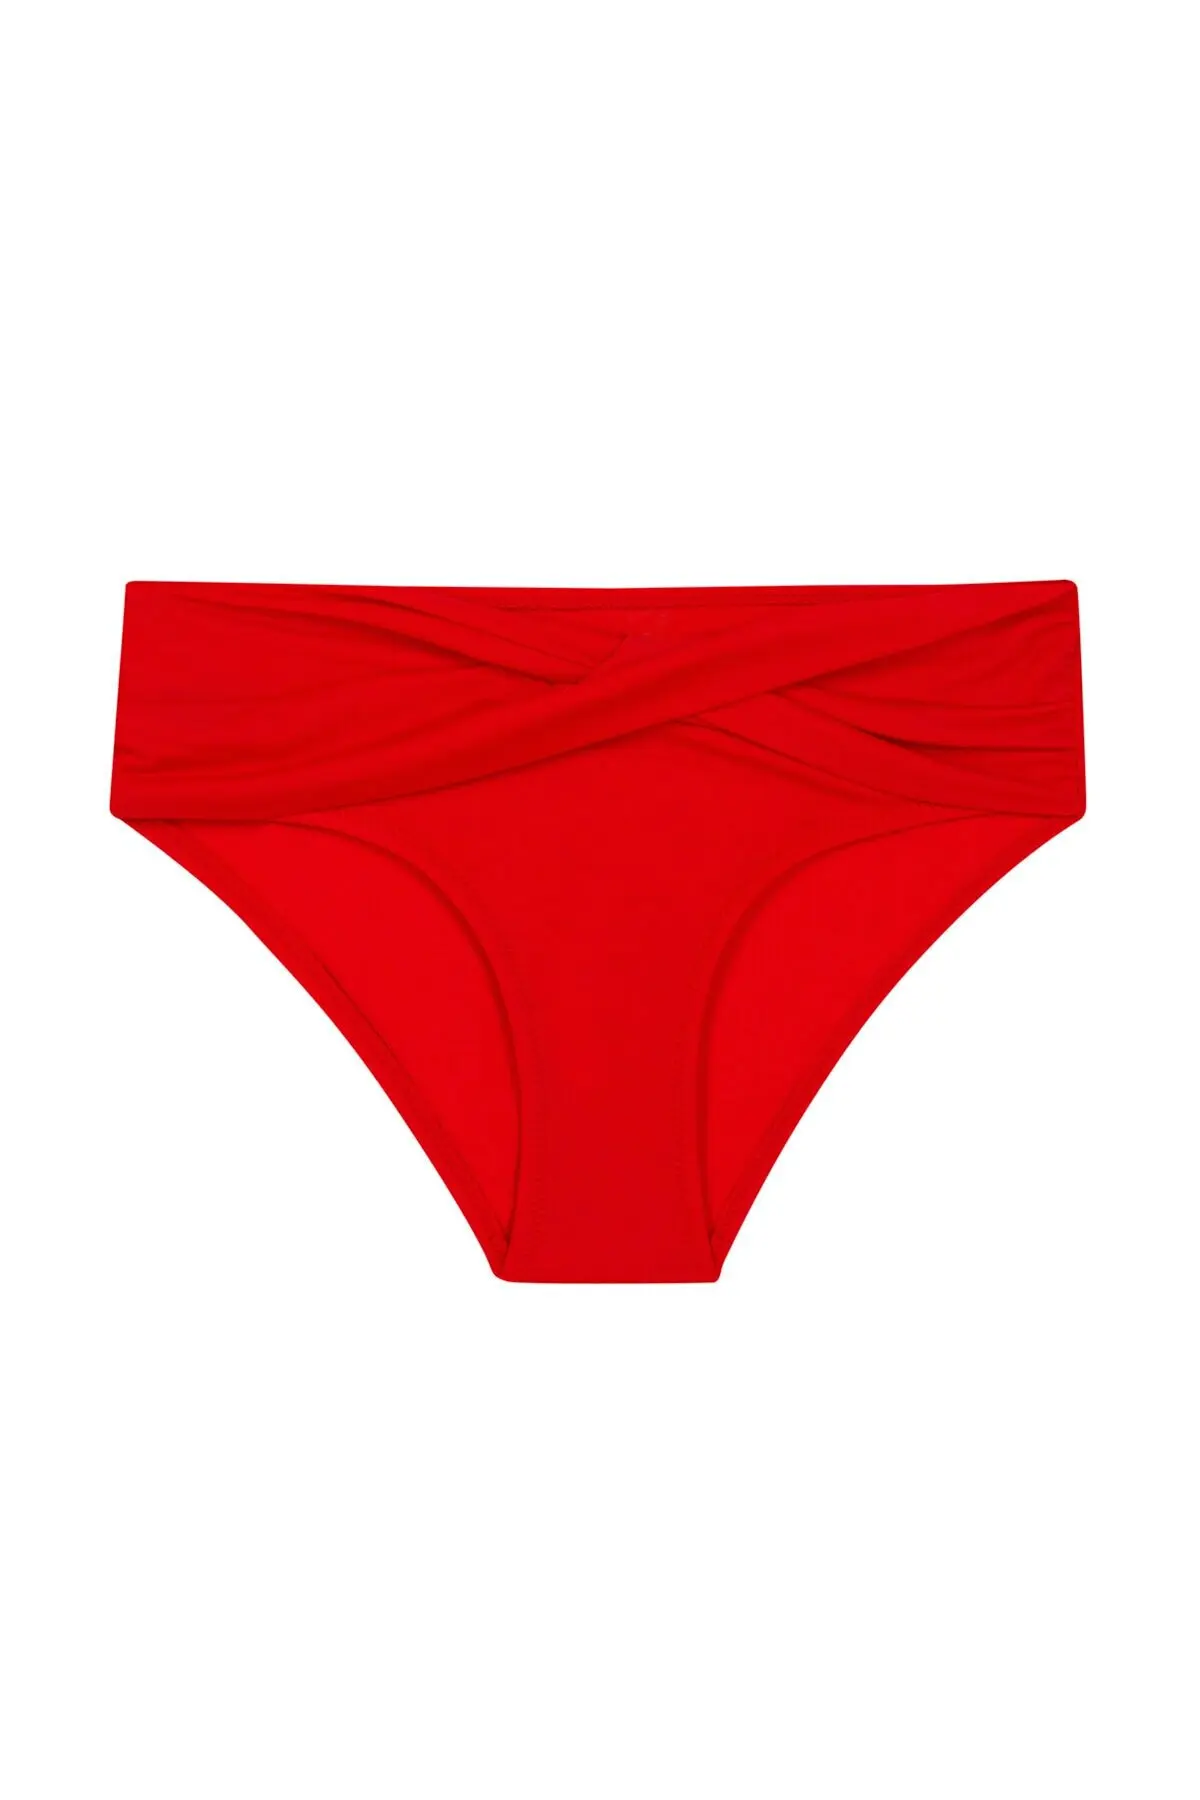 LOOK FOR YOUR WONDERFUL NIGHTS WITH ITS STUNNING Women's Red Basic Twist Bikini Bottoms FREE  SHIPPING